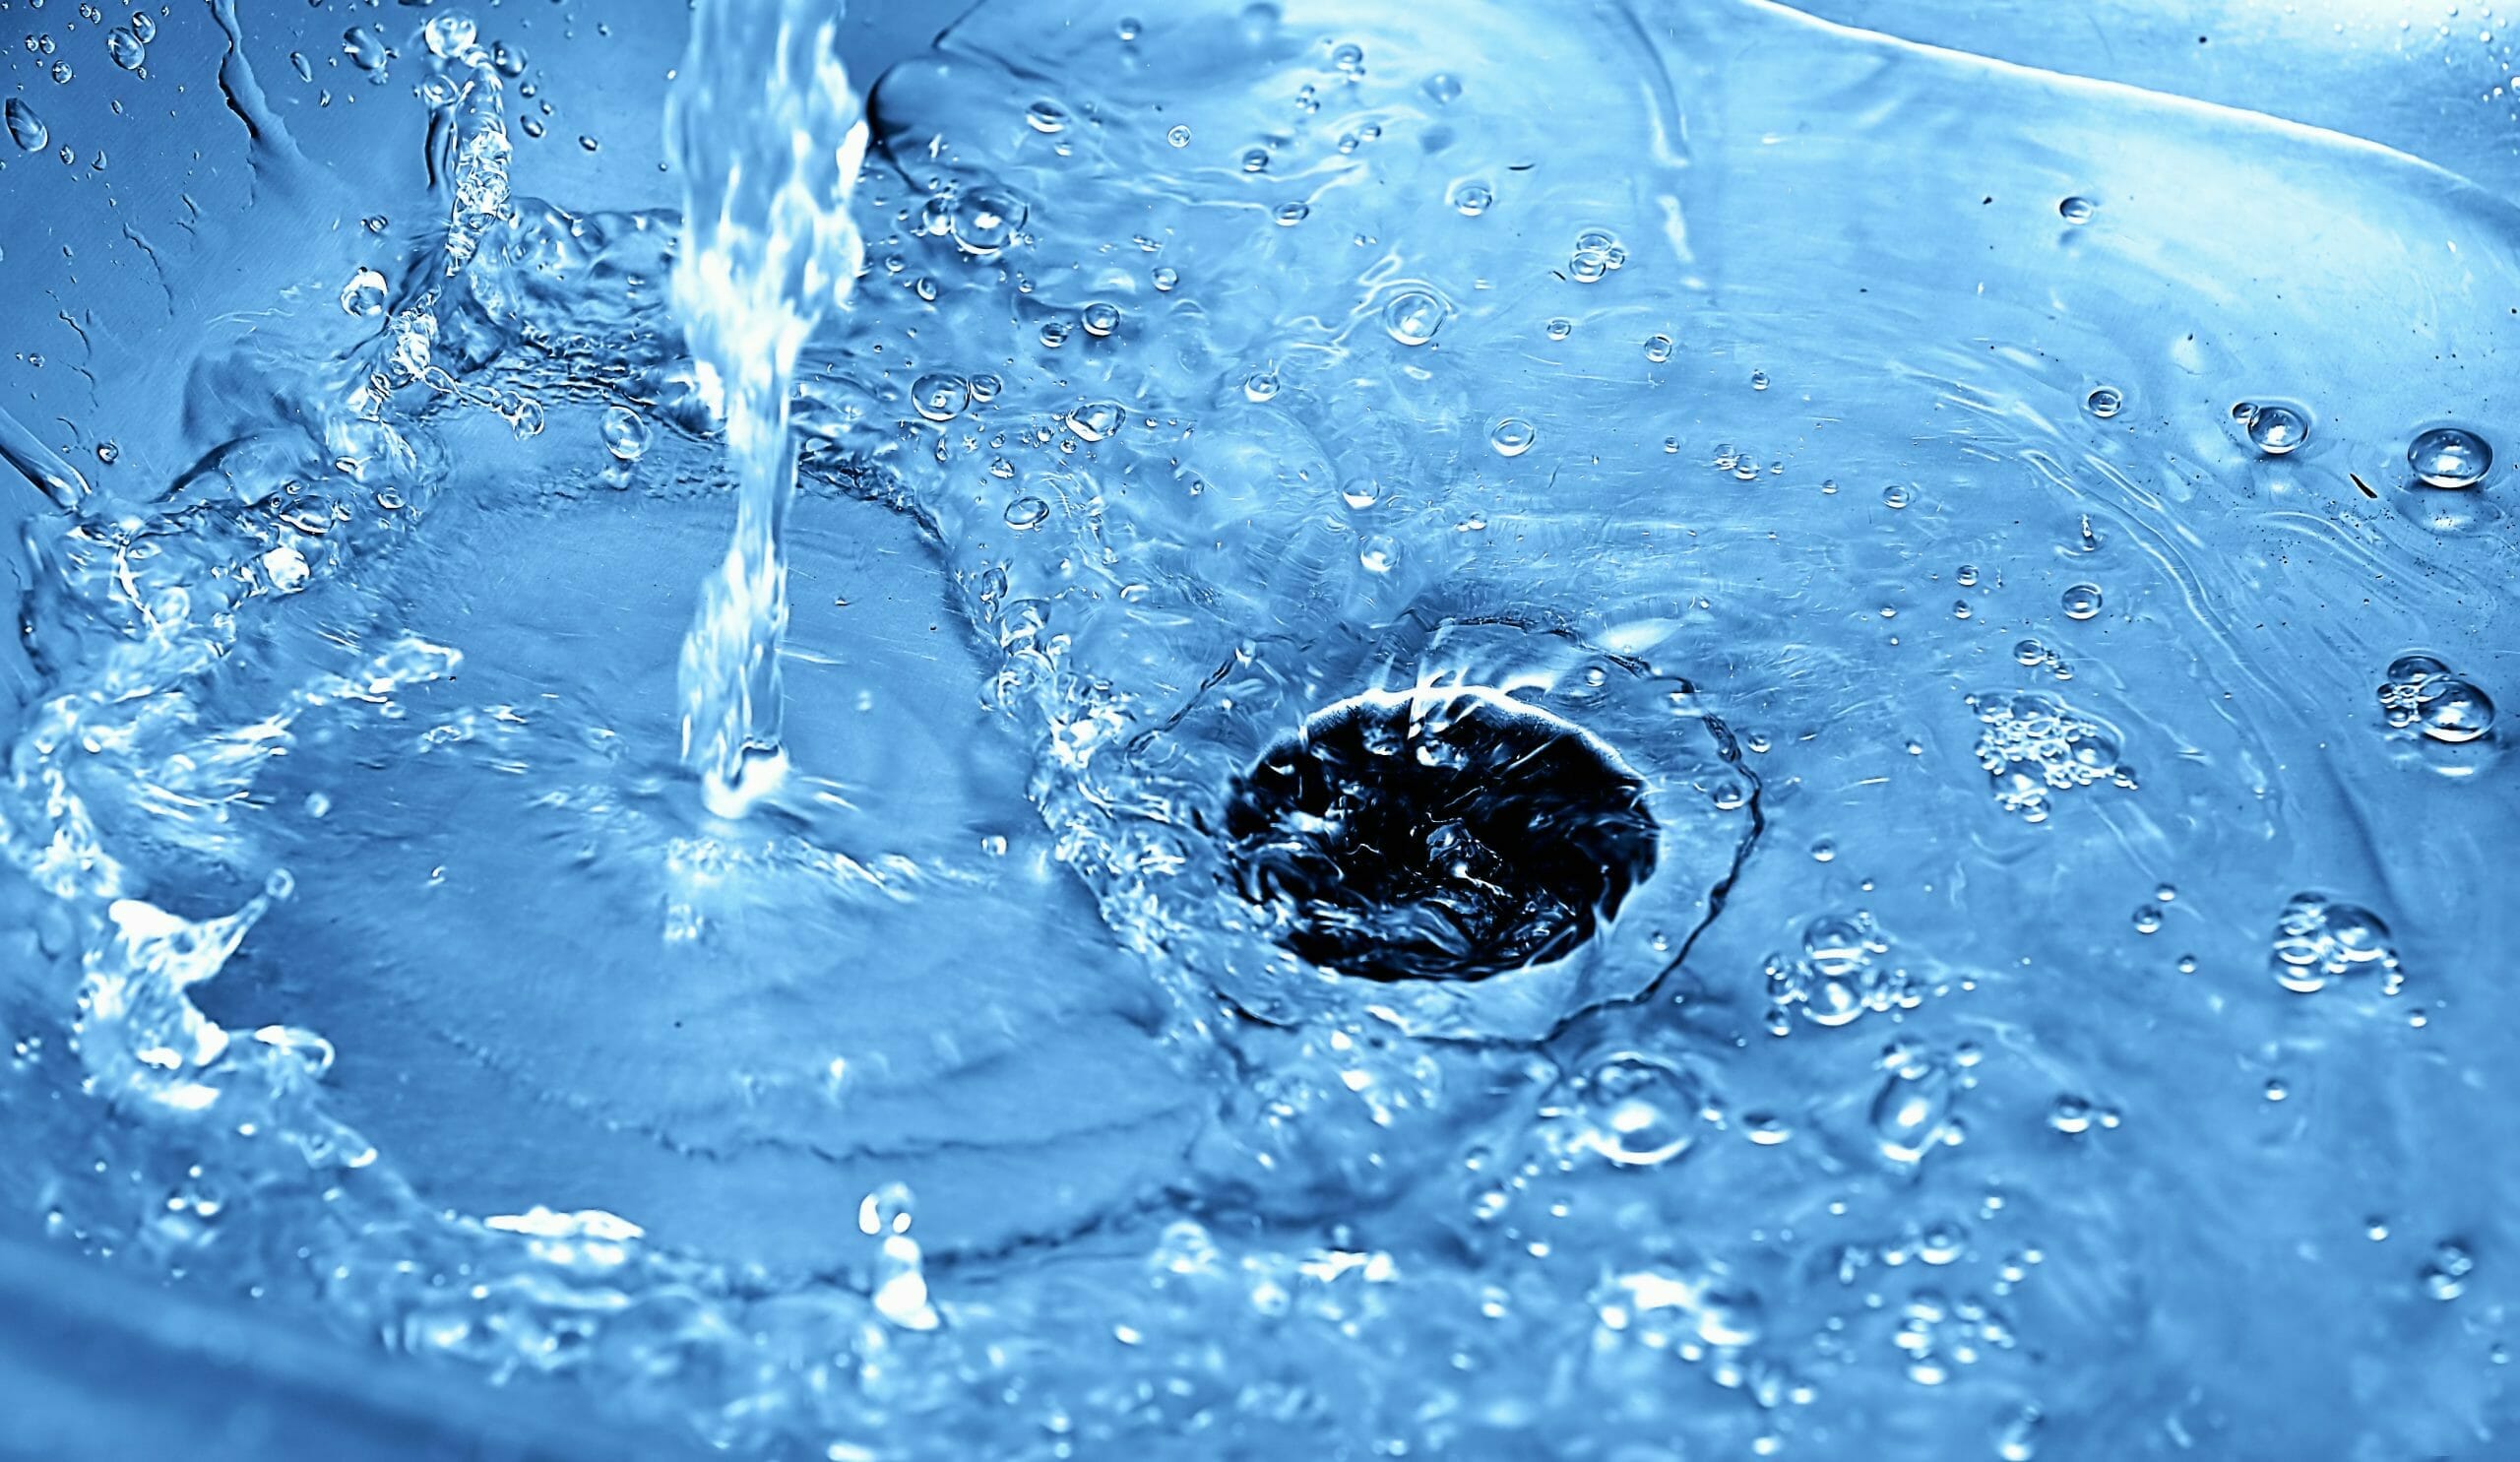 Drain cleaning Services in St. Charles, IL